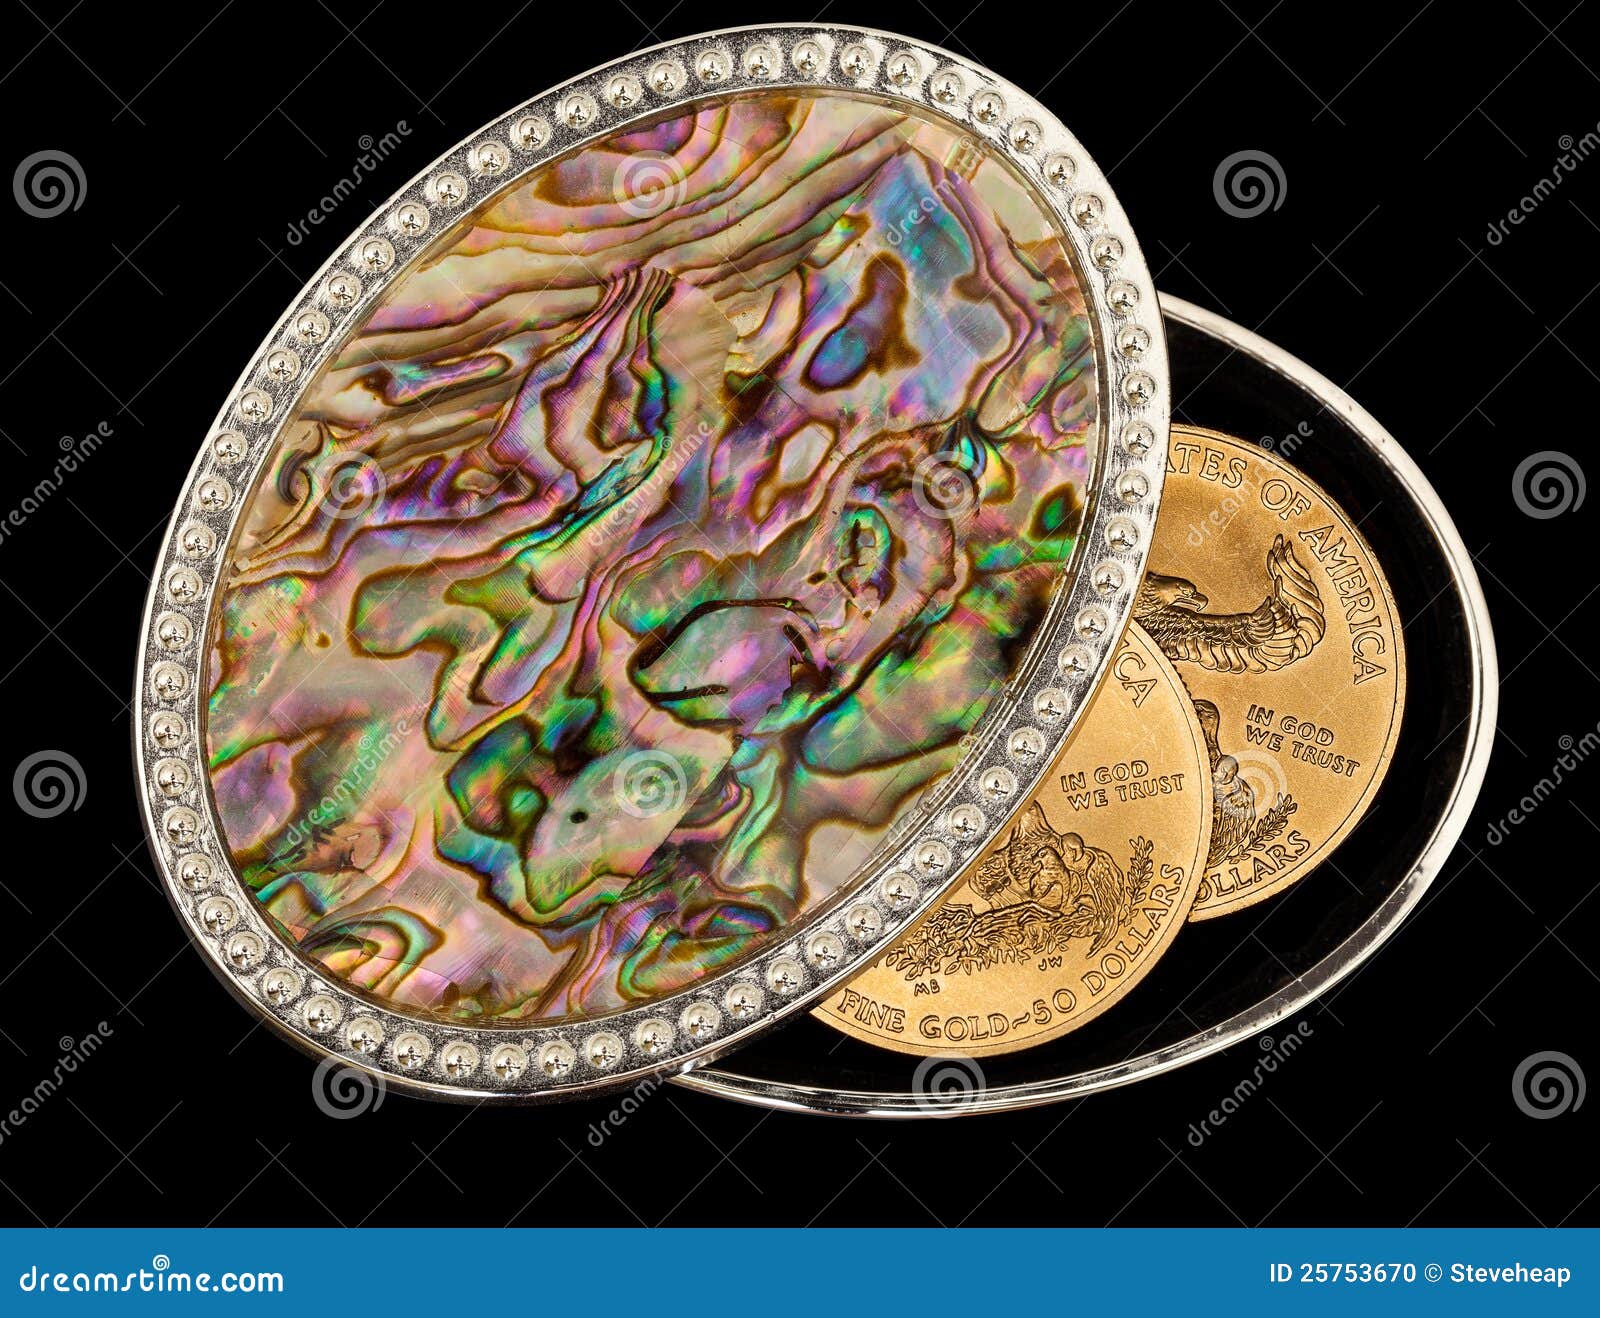 Iridescent Mother Of Pearl Box Gold Coins Stock Photo 